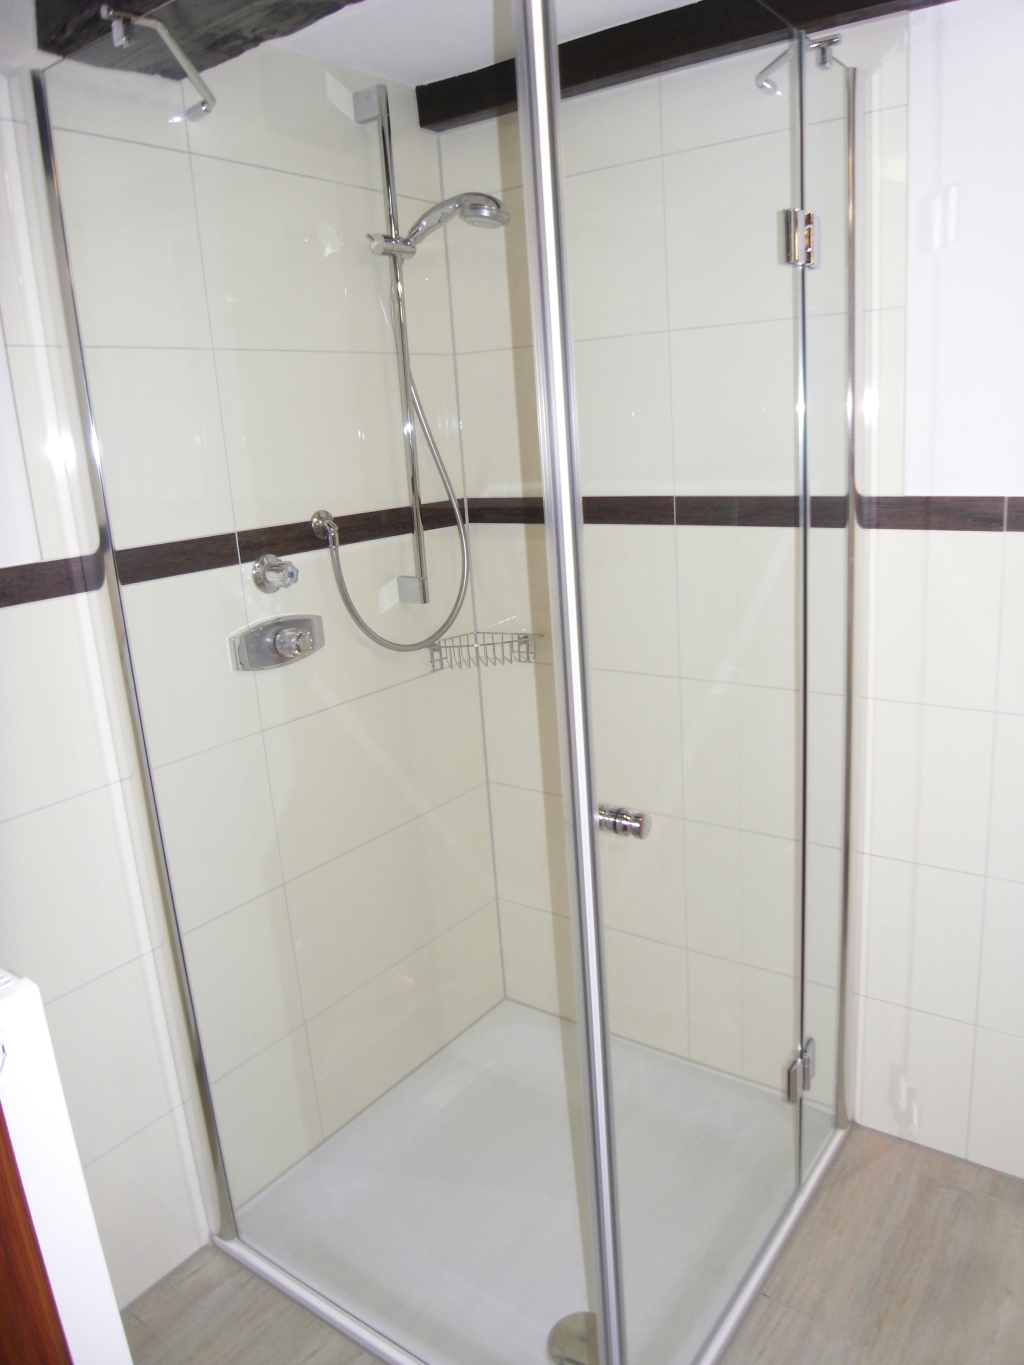 Image of the shower